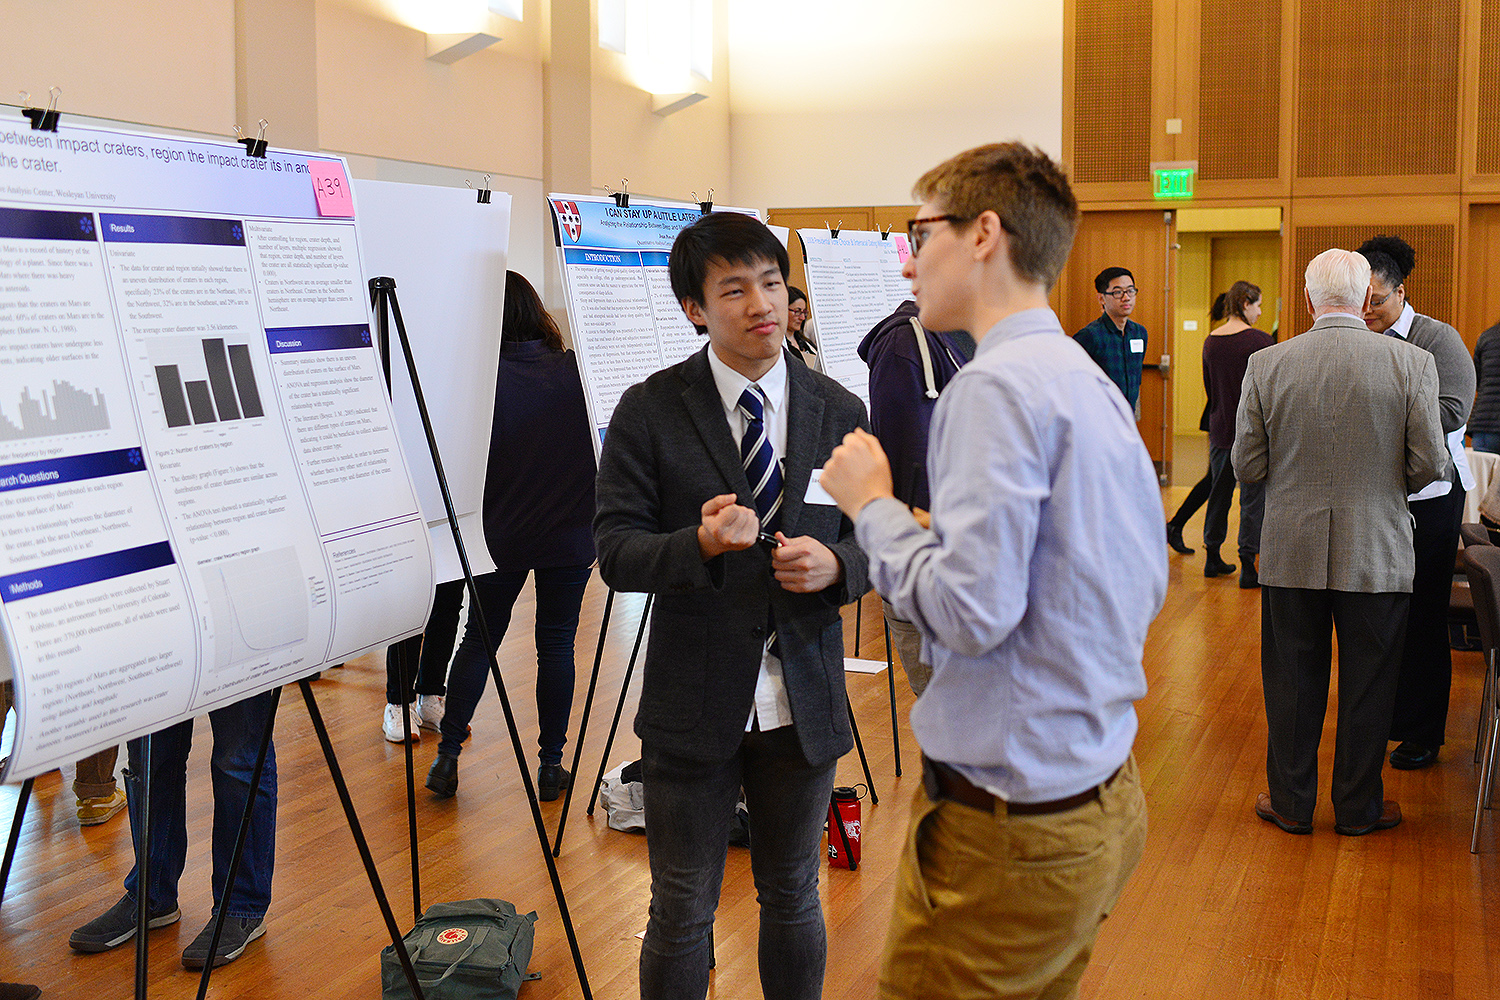 Zehua (Jack) Wang '20 presented his story on "The Relation between Region and Diameter of Impact Craters on Mars."